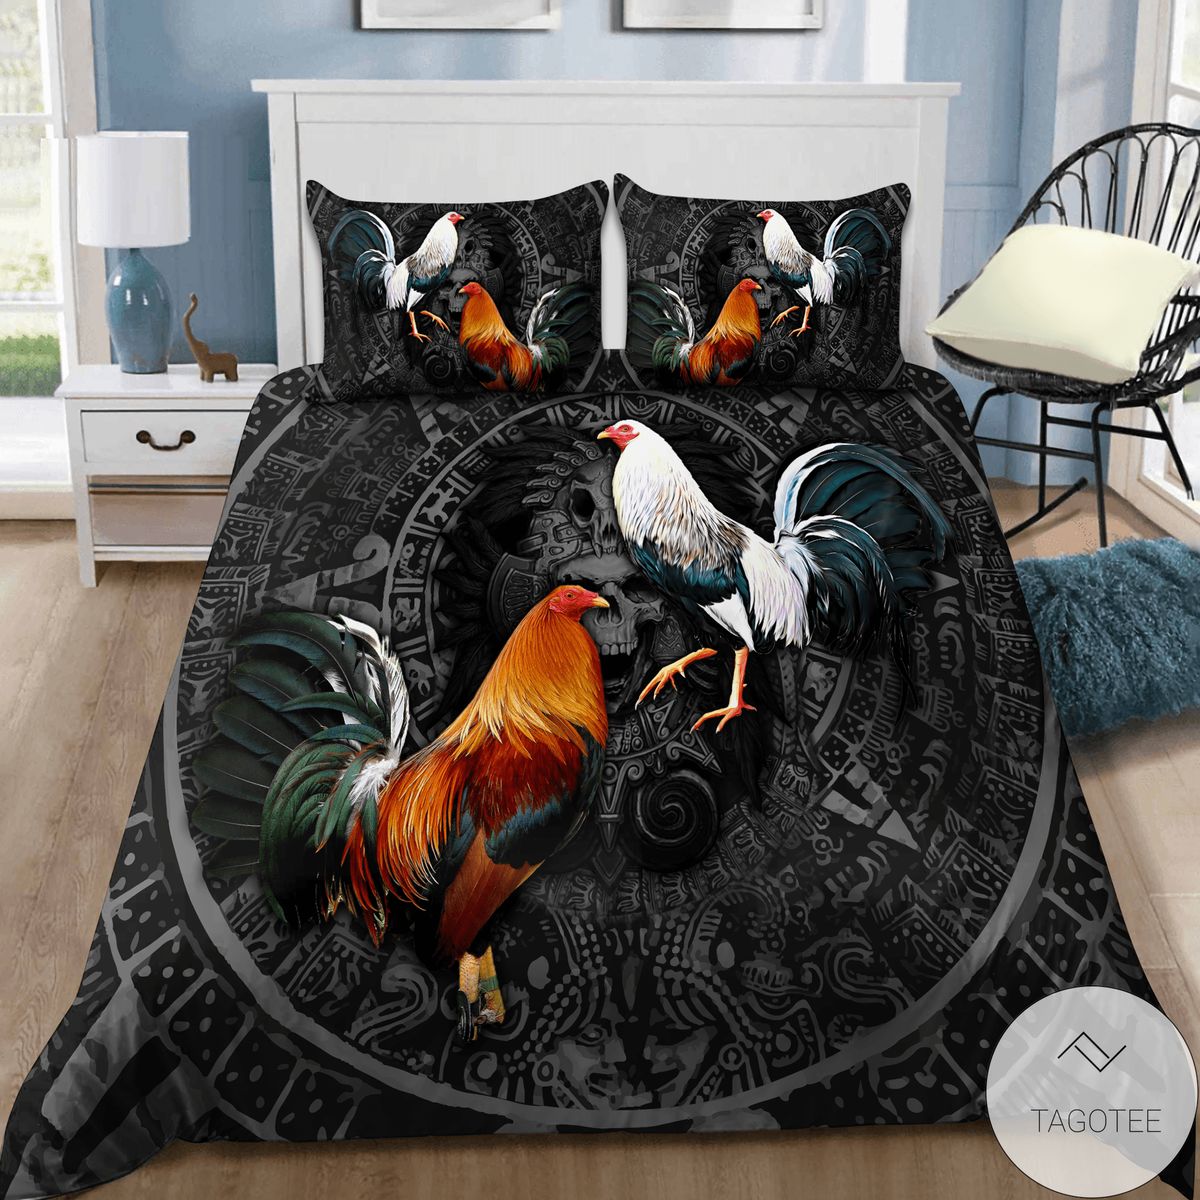 Mexican Aztec Rooster Bedding Set